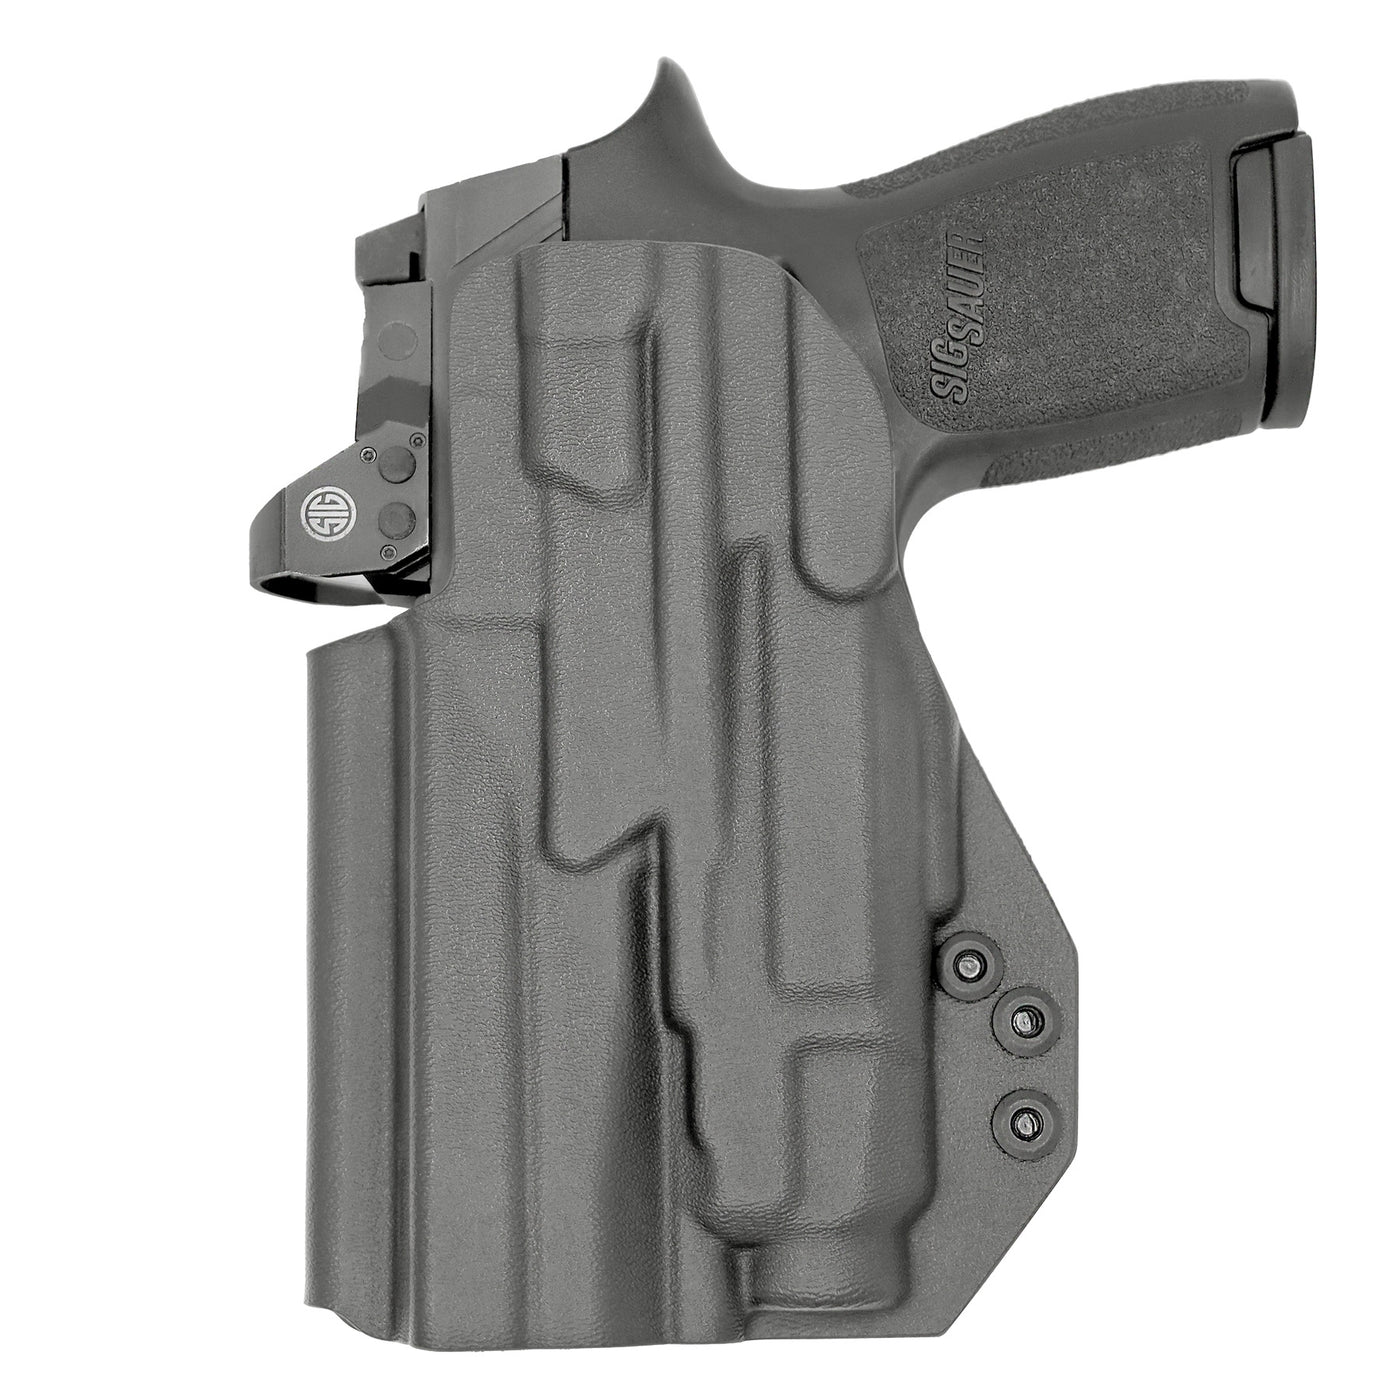 C&G Holsters Quickship IWB Tactical Sig P320/c Streamlight TLR7/a in holstered position back view